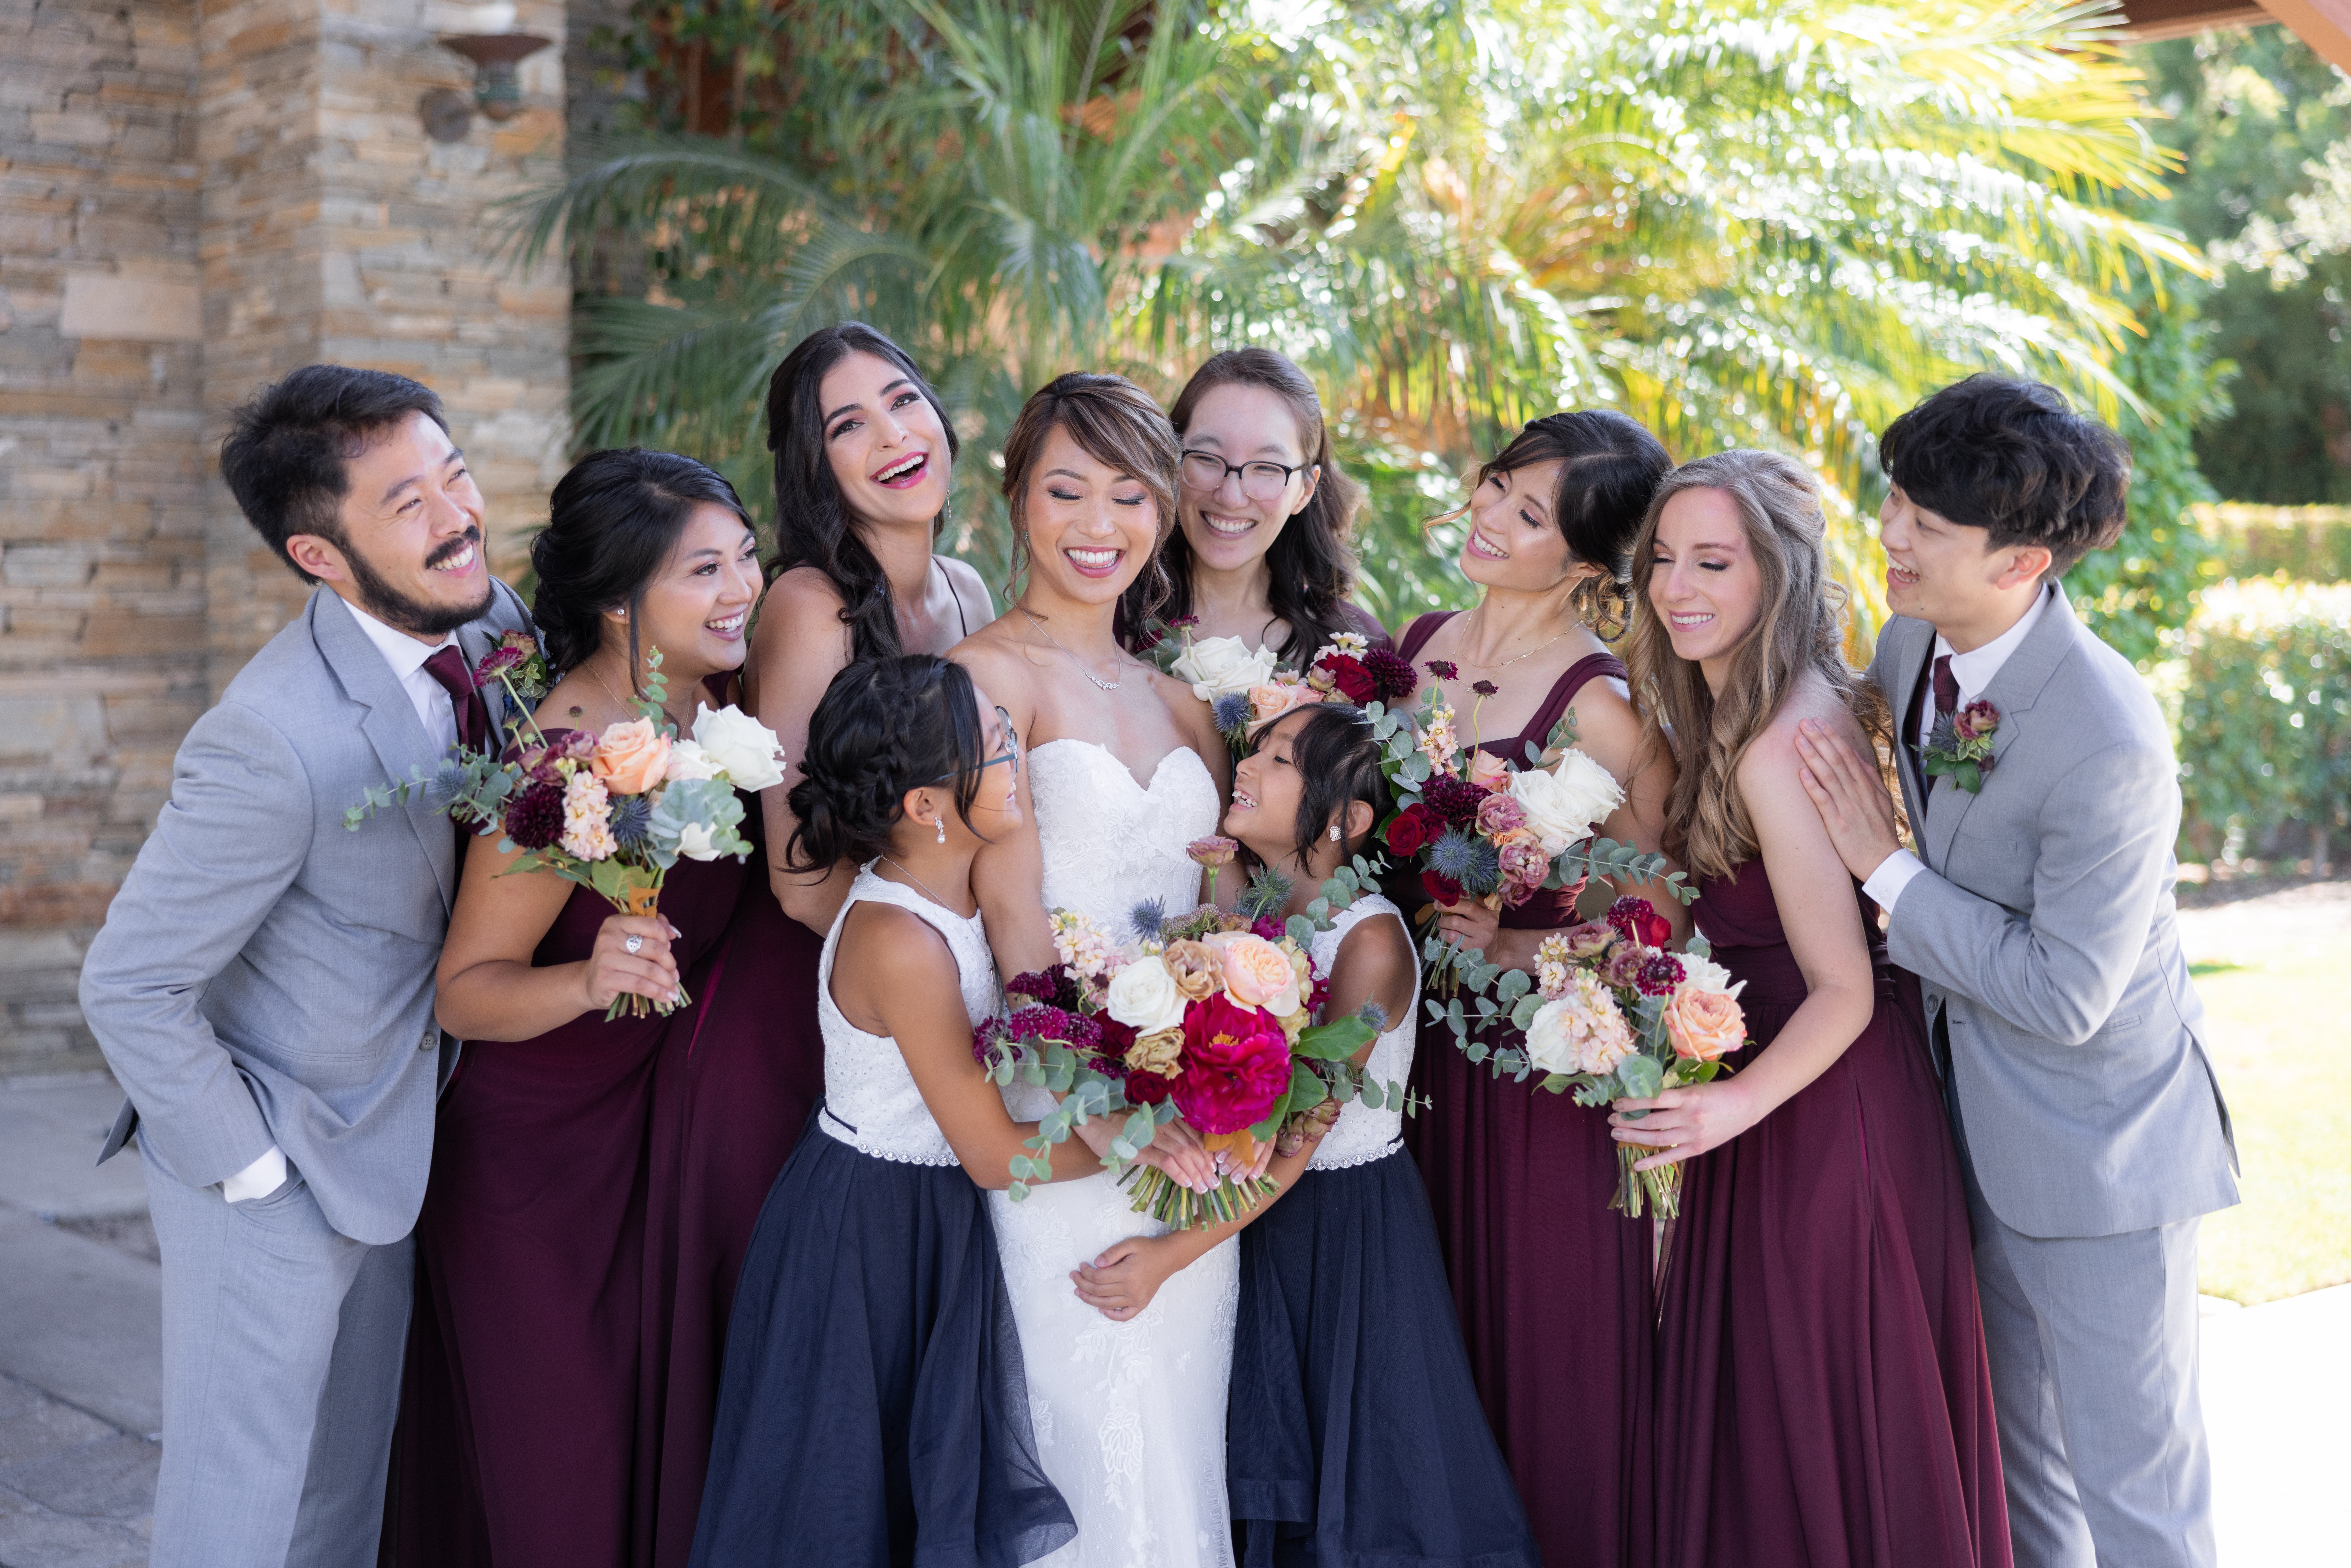 bride in strapless wedding dress and jewel toned bridal bouquet stand with co-ed wedding party in maroon